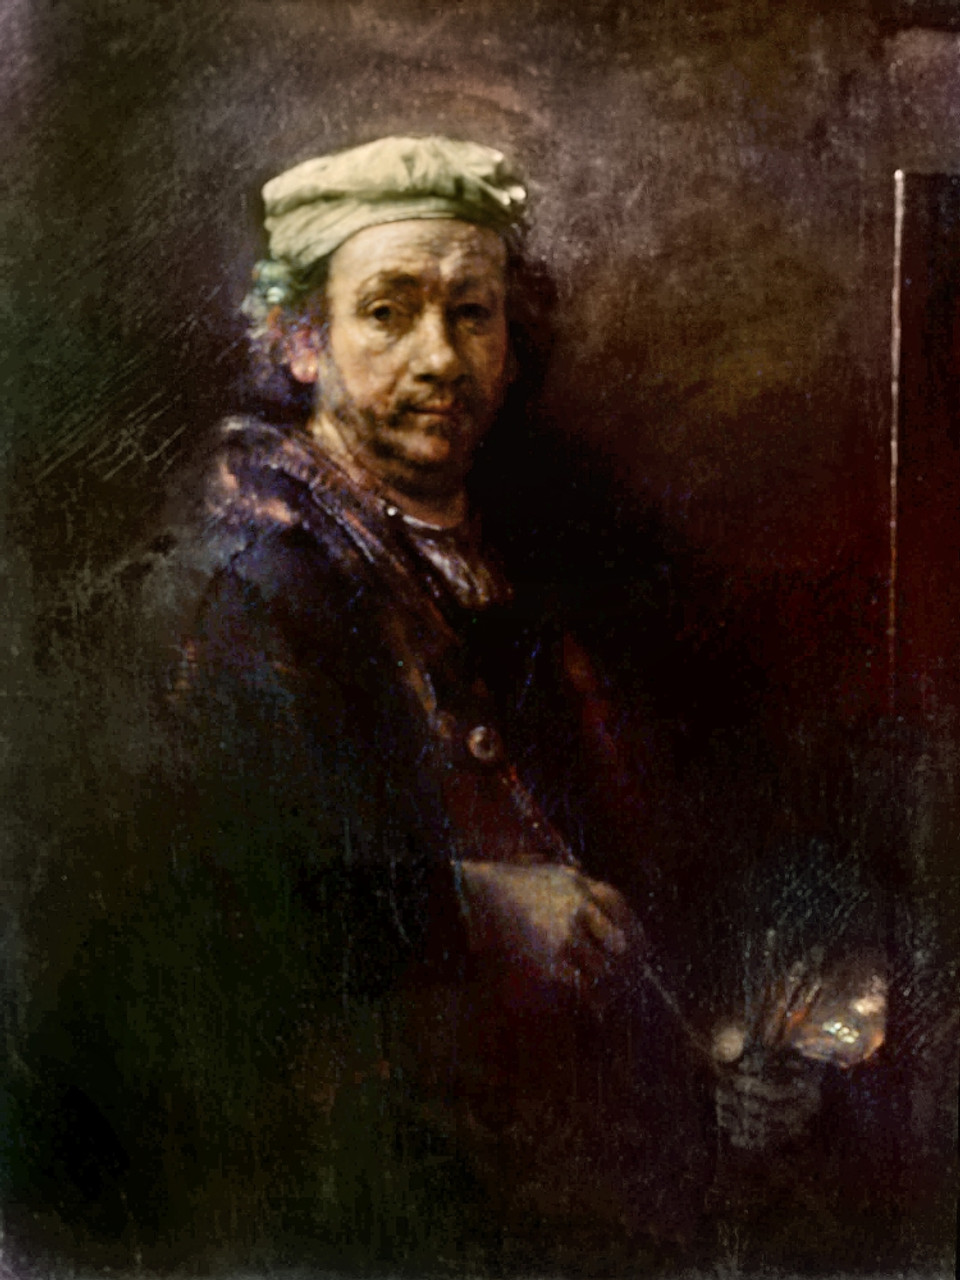 Rembrandt: Self-Portrait. by /Nself-Portrait Granger Collection Rijn, Print Easel. At On Van Rembrandt - Oil Posterazzi Poster # By His 1660. VARGRC0054419 - Canvas Item